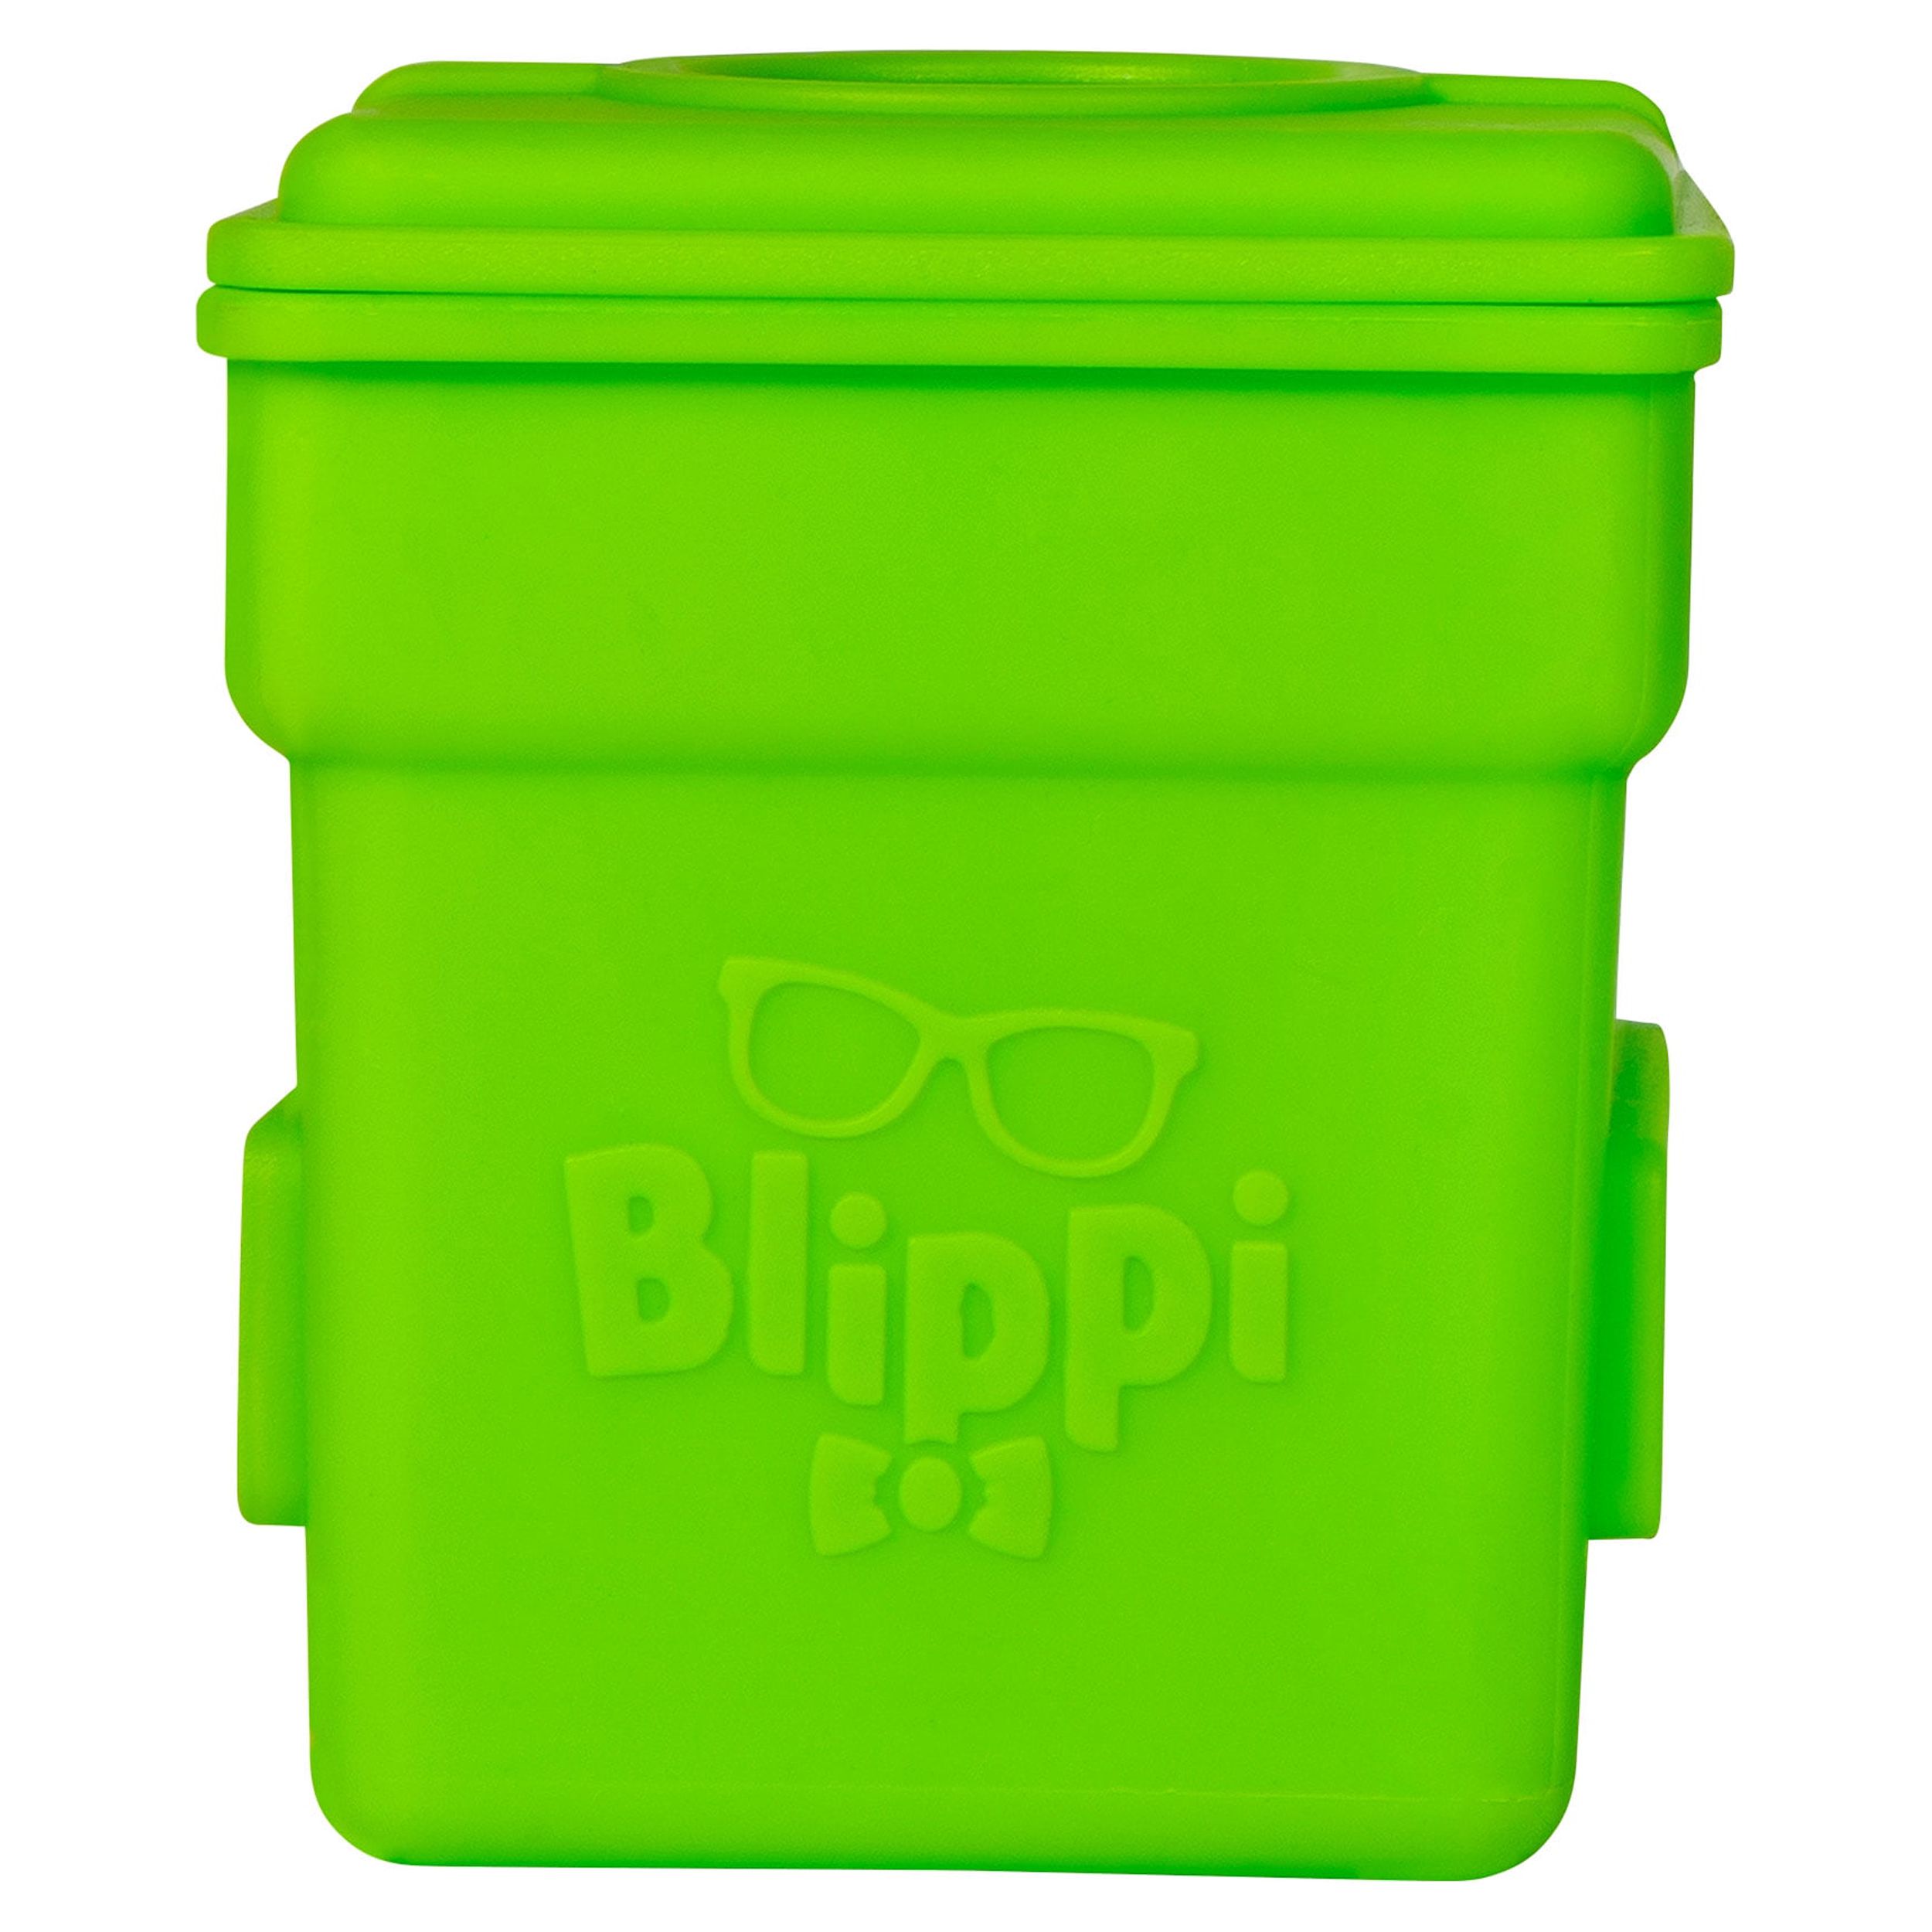 BLIPPI Recycling Truck Play Vehicle - image 16 of 18